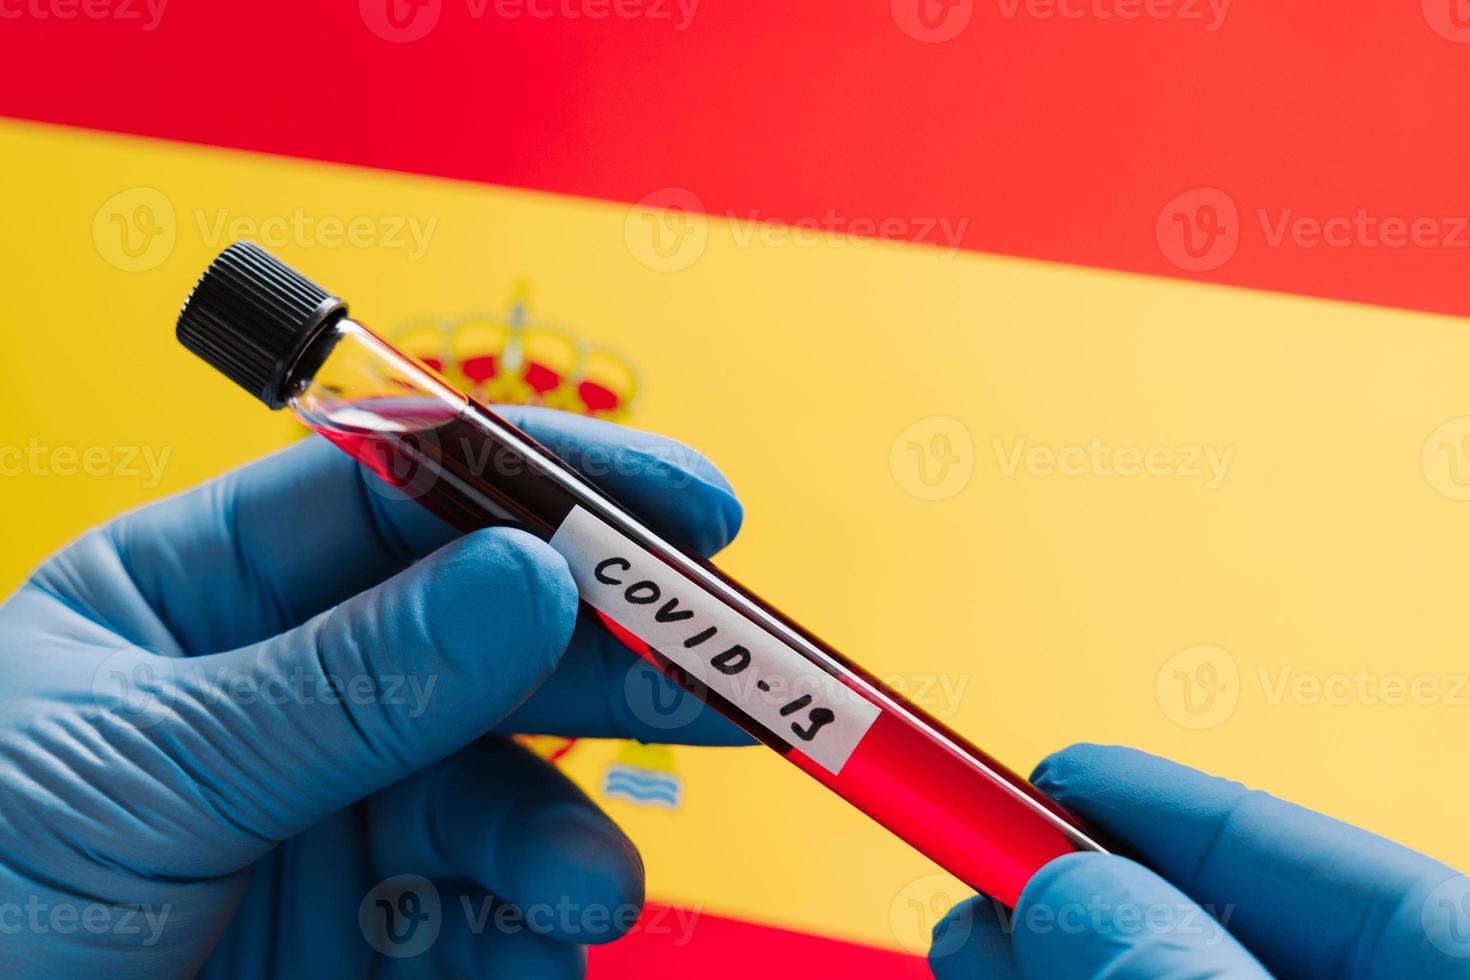 Infected blood sample in tube against Spain flag background. Coronavirus outbreak in Europe. Virus testing concept. Medical research, diagnosis photo